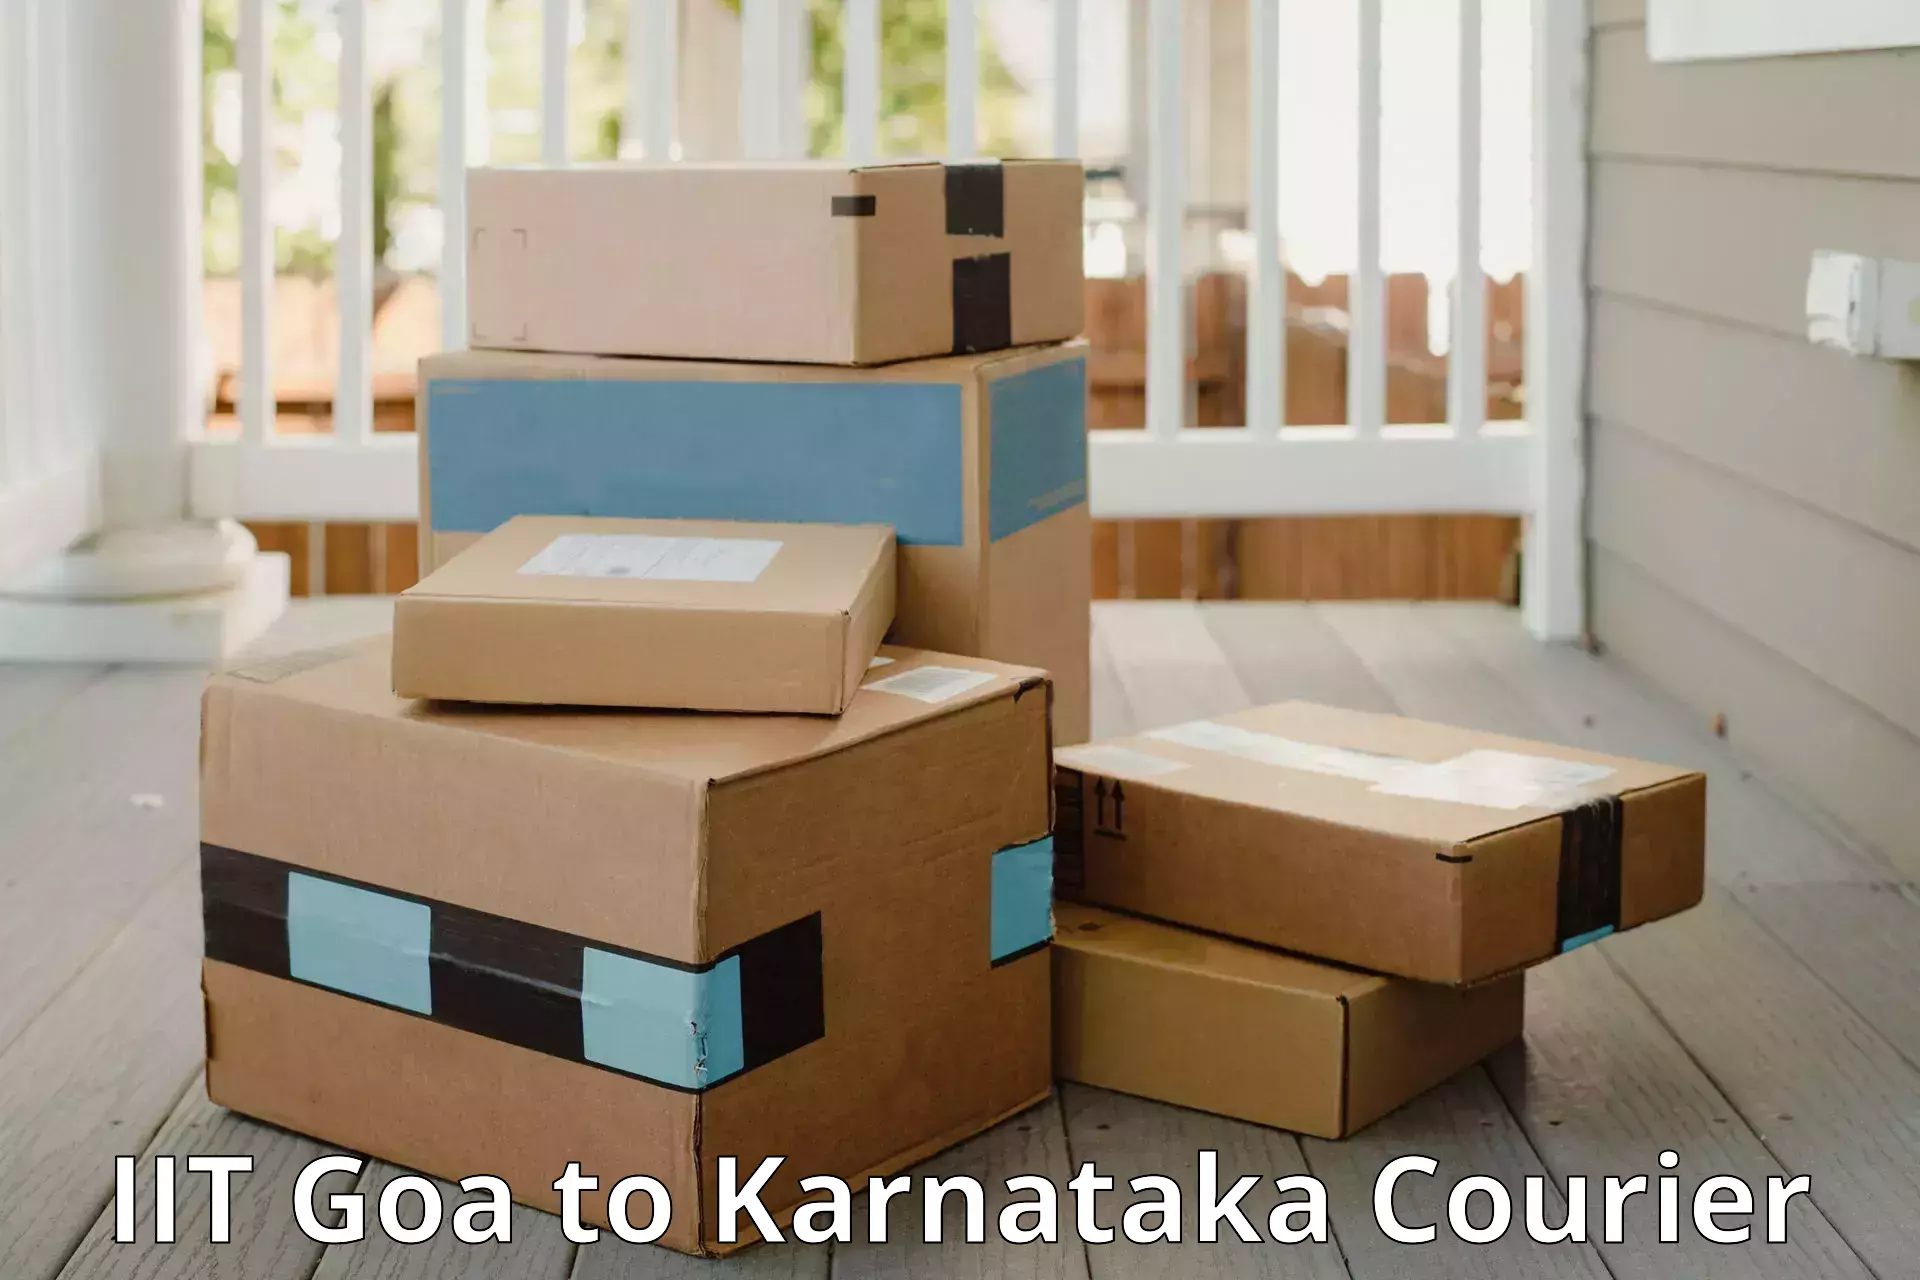 Luggage transport consulting IIT Goa to Turuvekere